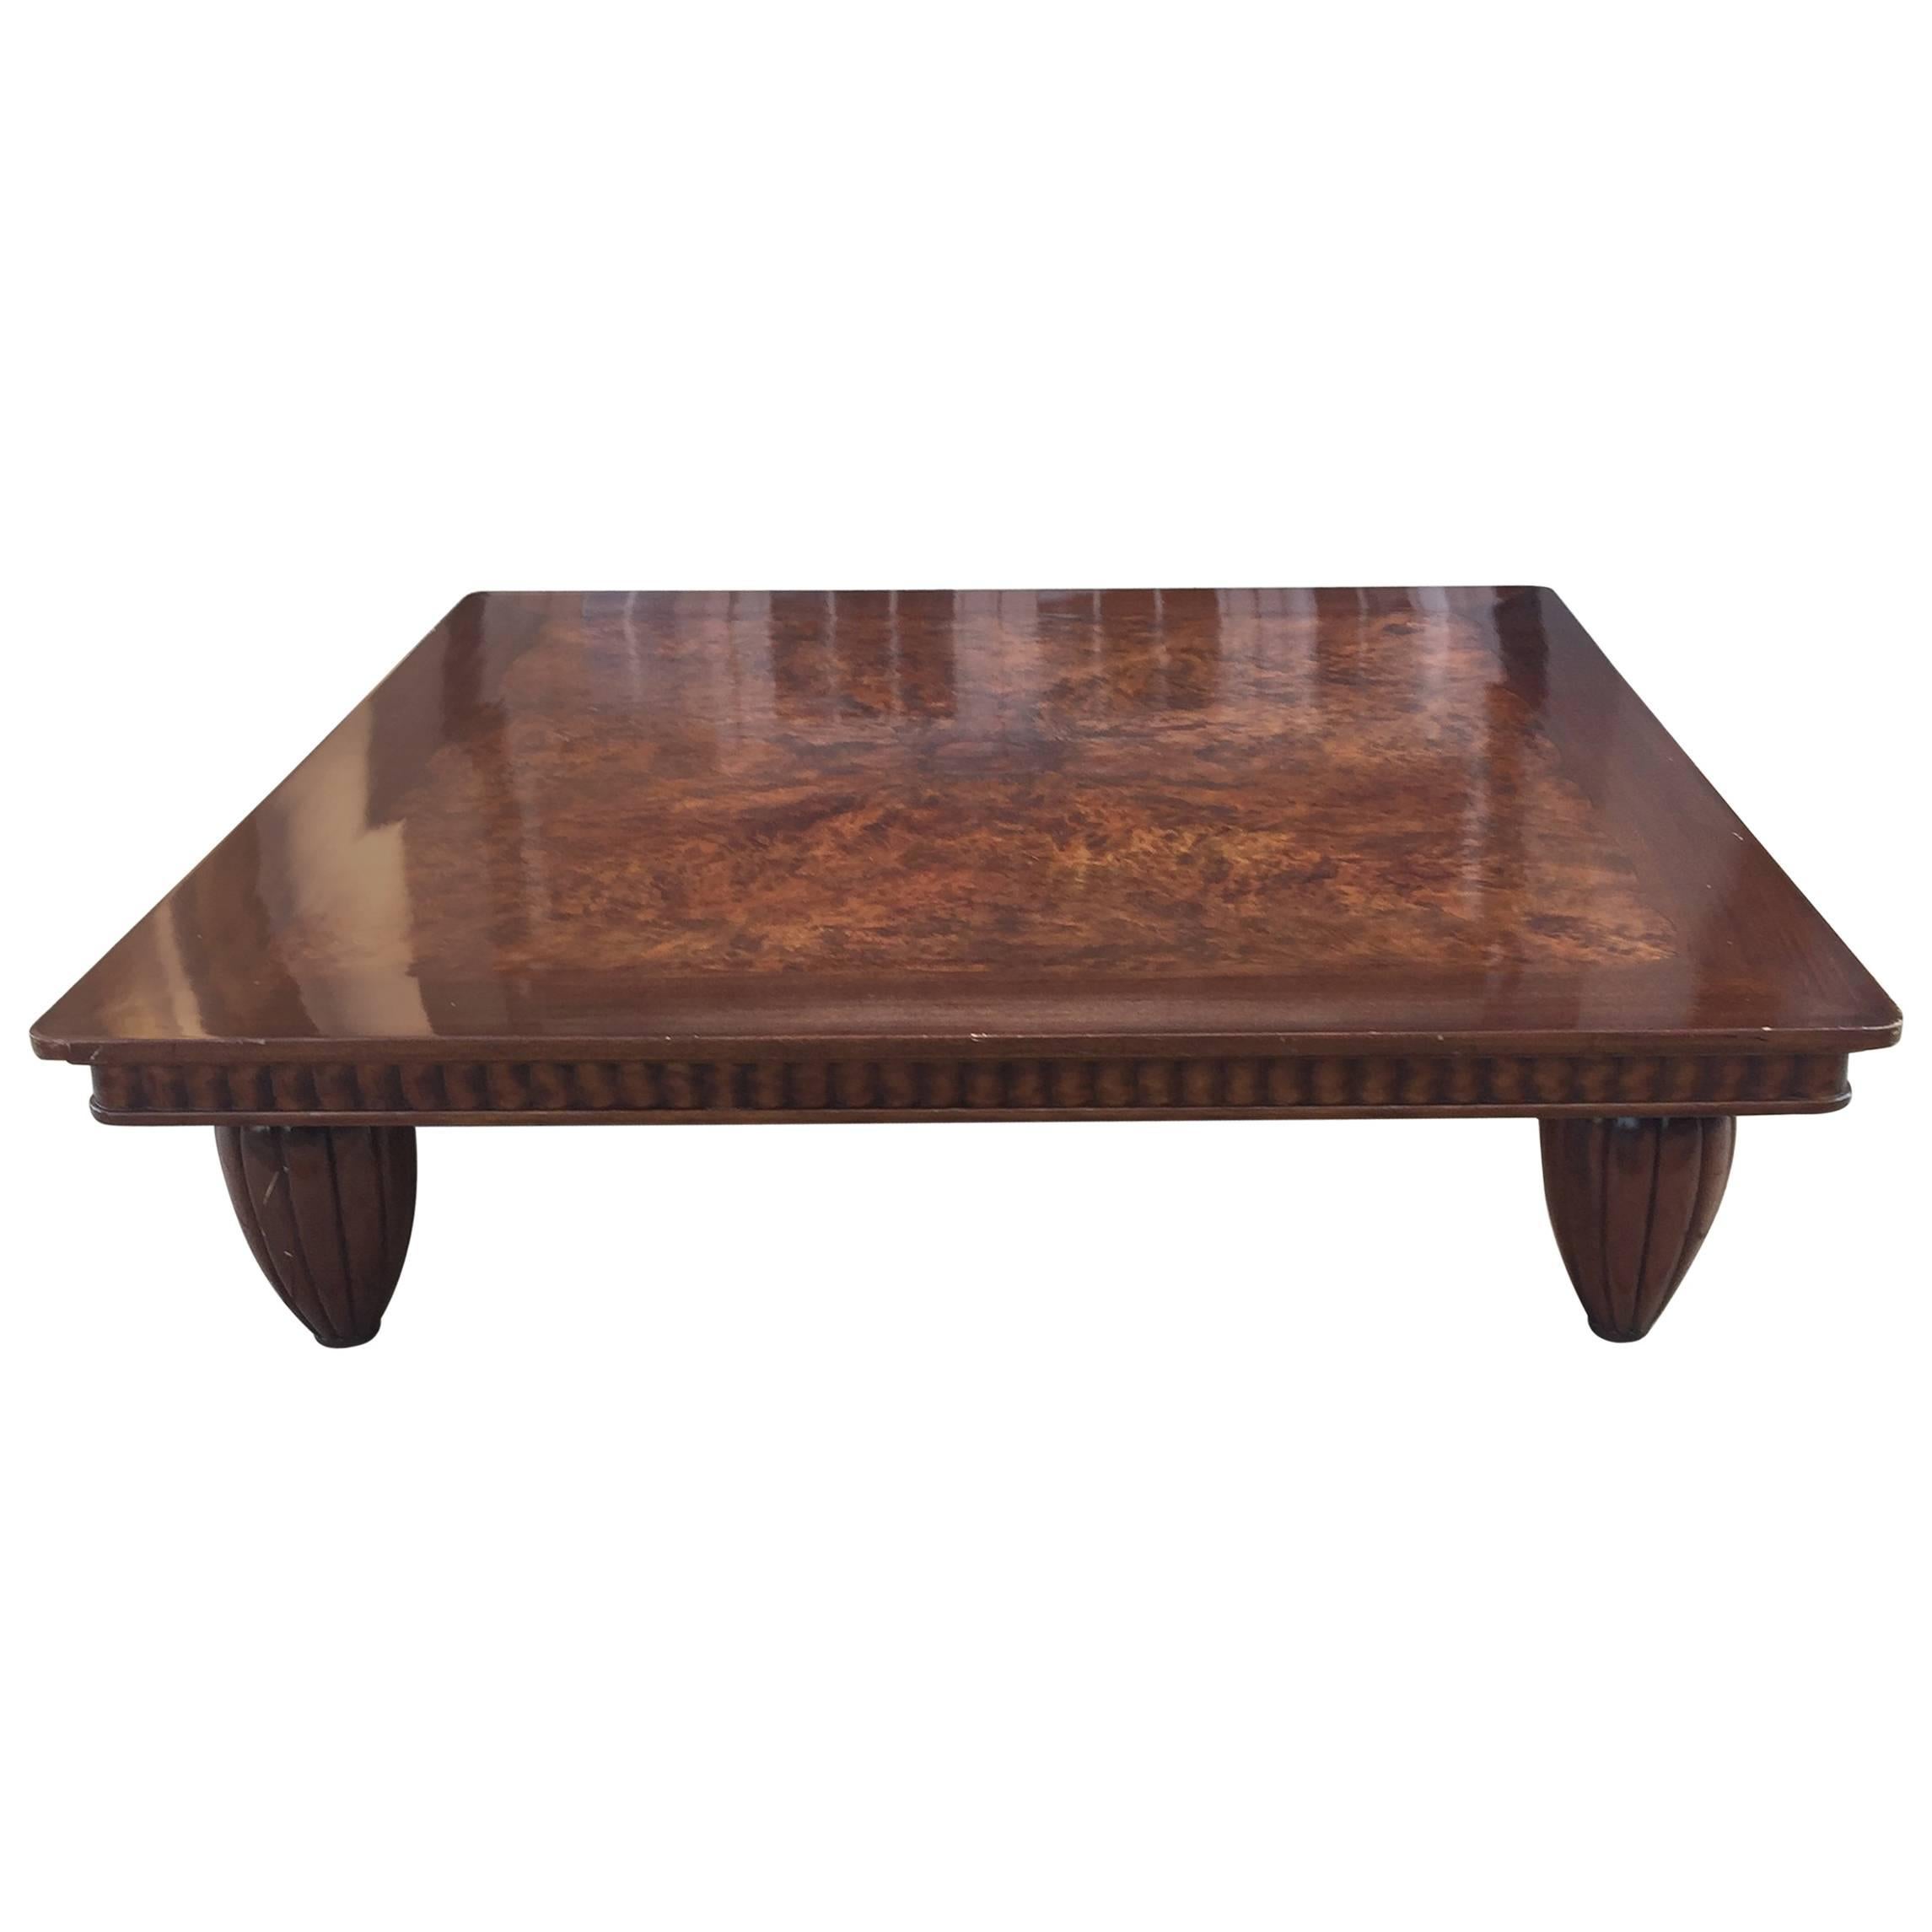 Monumental Art Deco Revival Coffee Table in the Manner of Ruhlmann For Sale